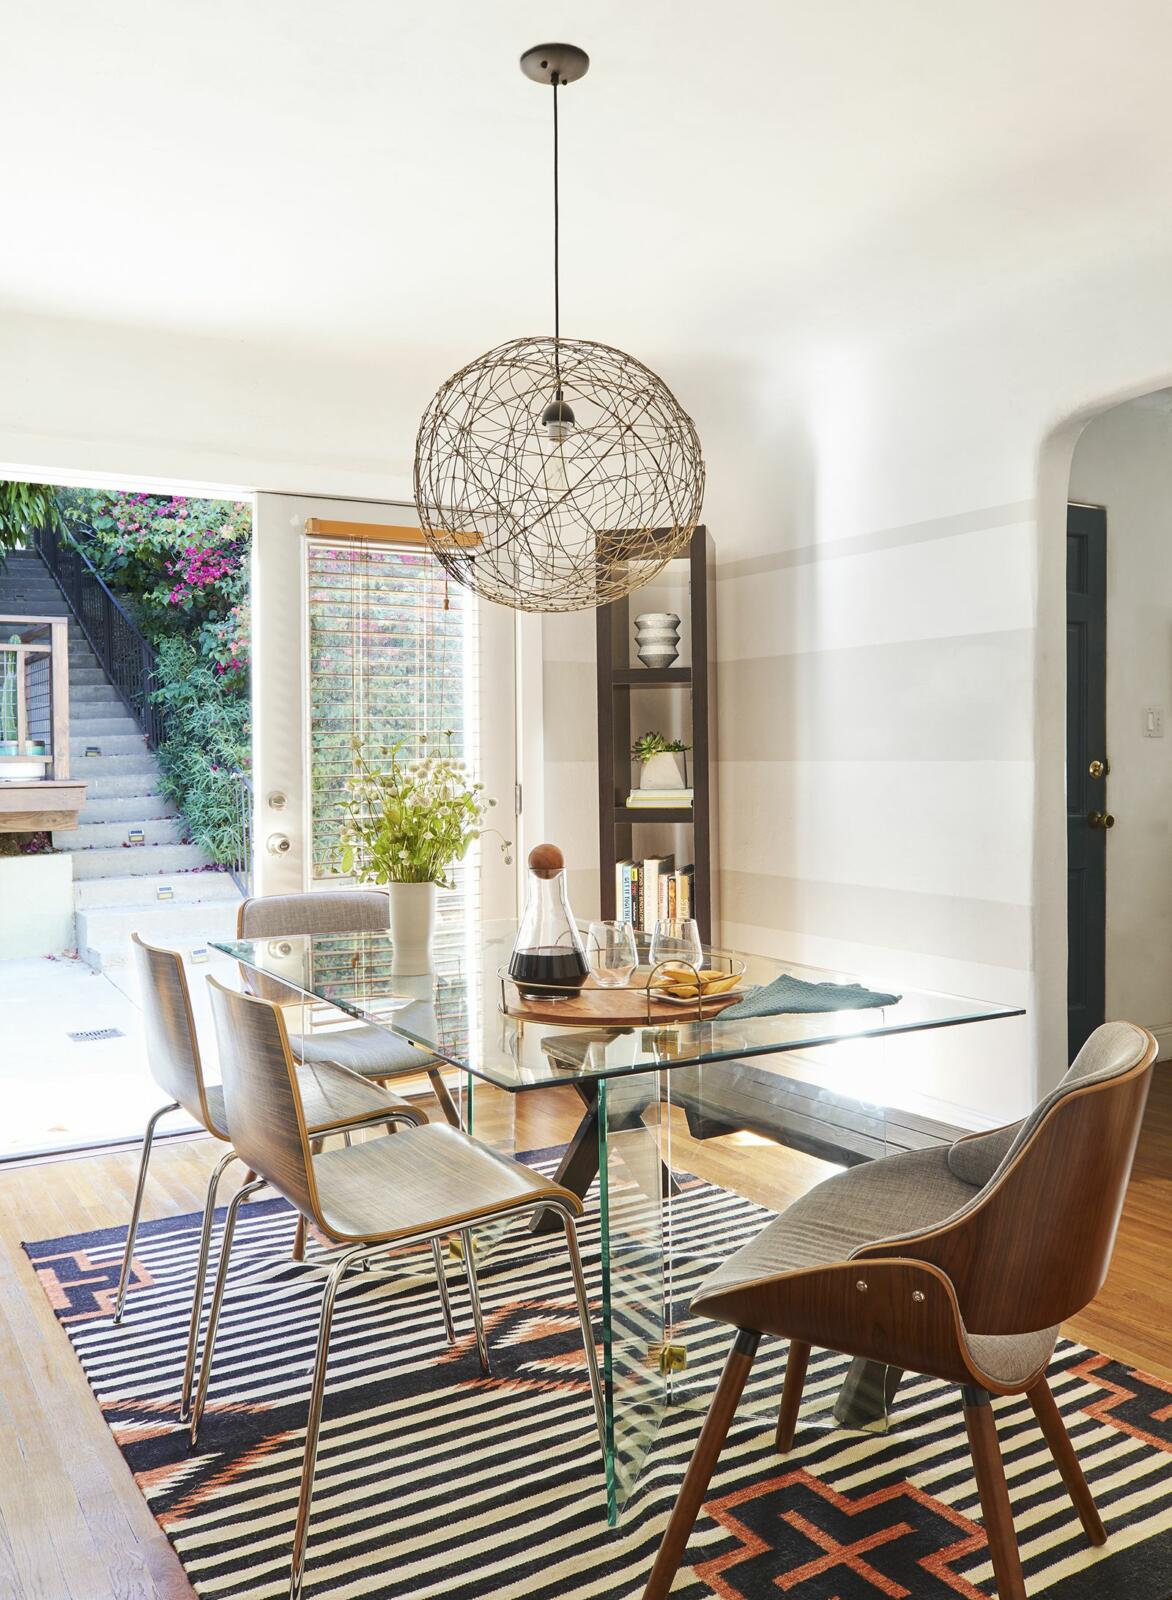 Modern dining room with unique pendant light and striped rug.